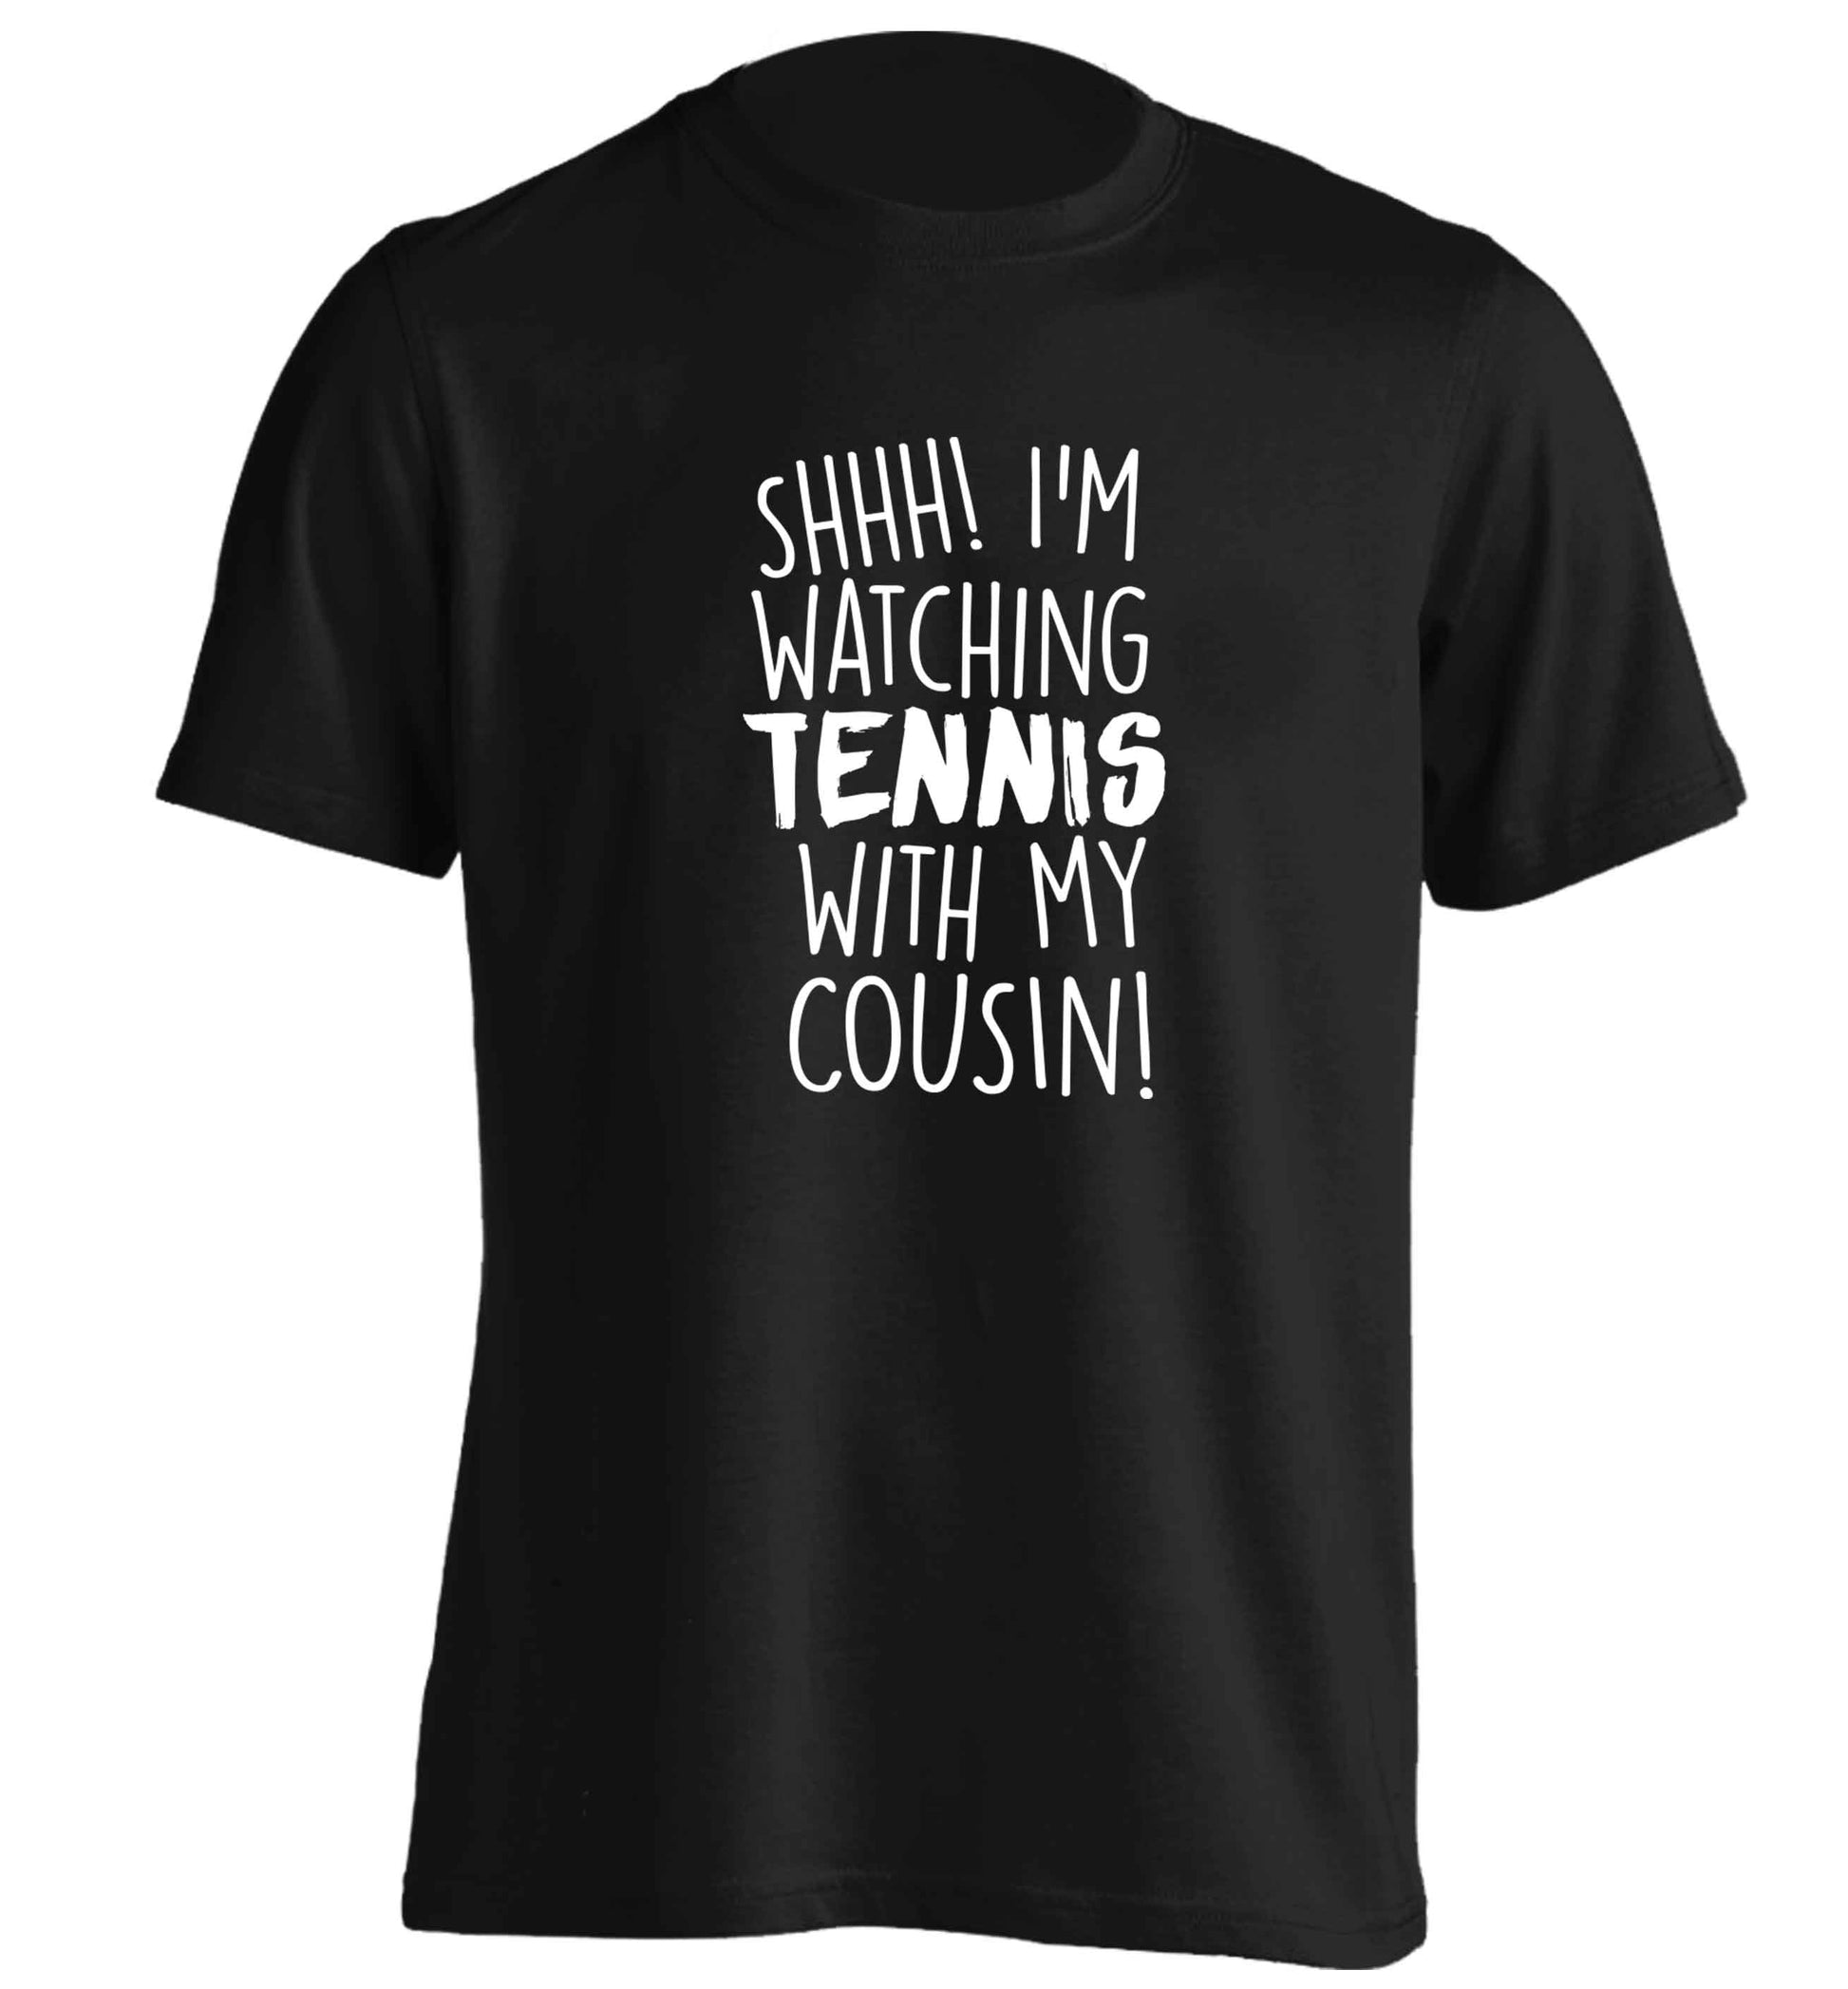 Shh! I'm watching tennis with my cousin! adults unisex black Tshirt 2XL